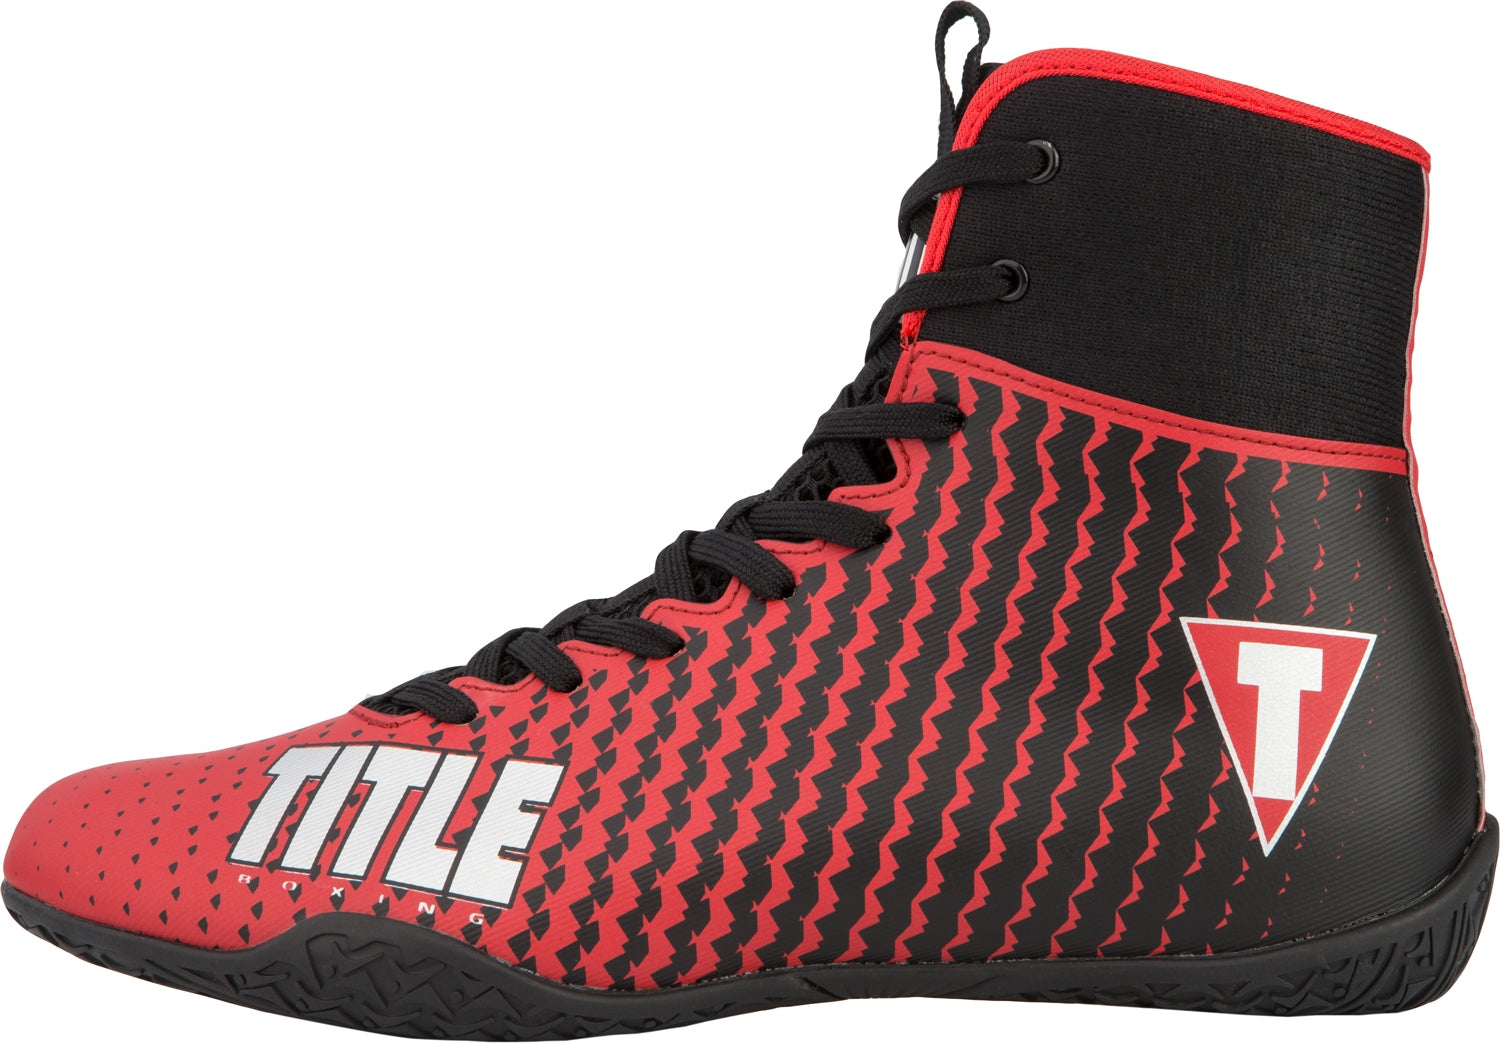 title innovate mid boxing shoes